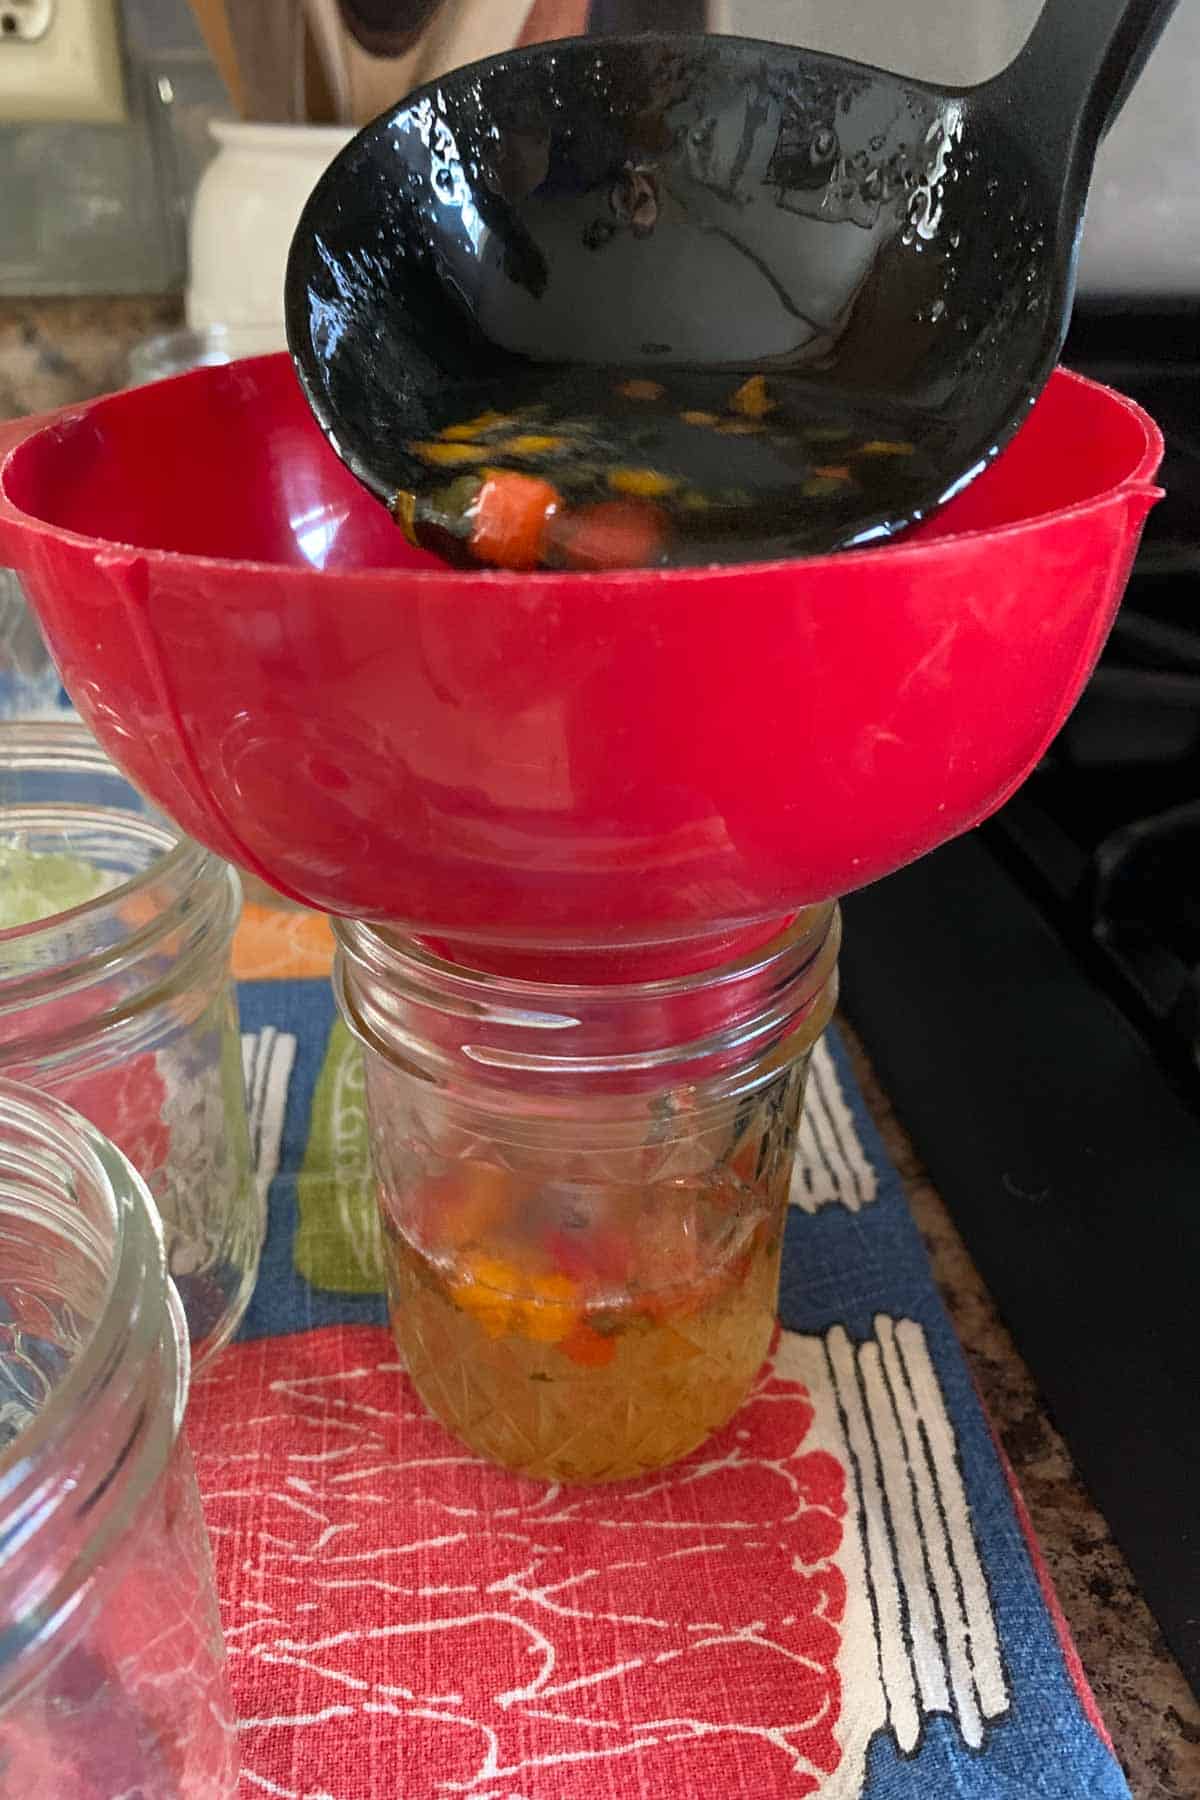 Ladling pepper jelly into jars with a funnel on the jar.